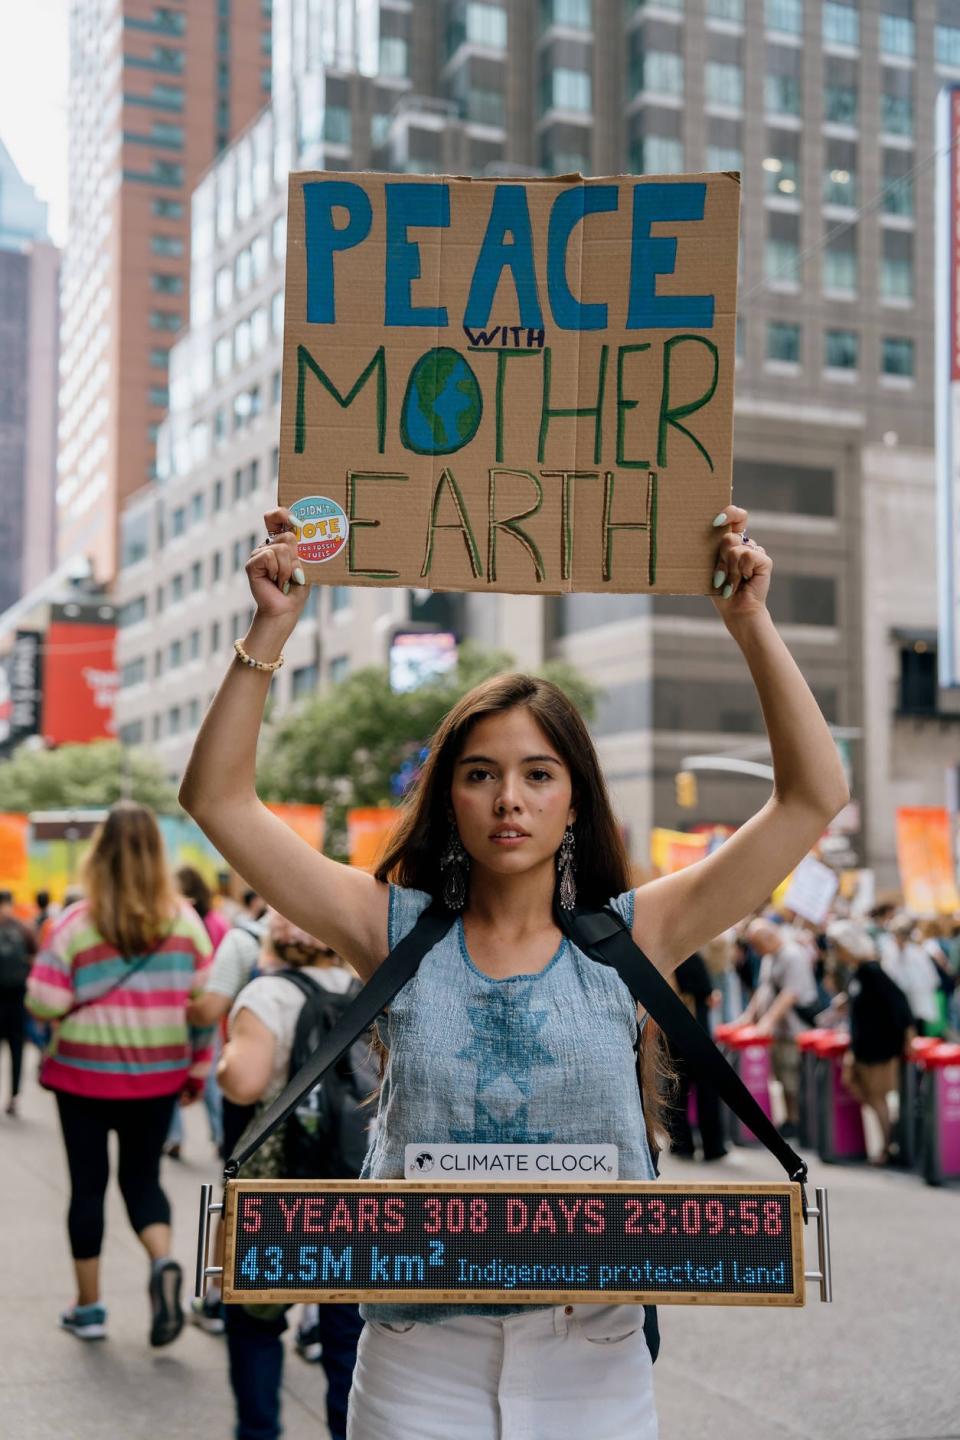 Xiye Bastida, a Climate Clock ambassador, marched in NYC on Sept 17 to end fossil fuels.